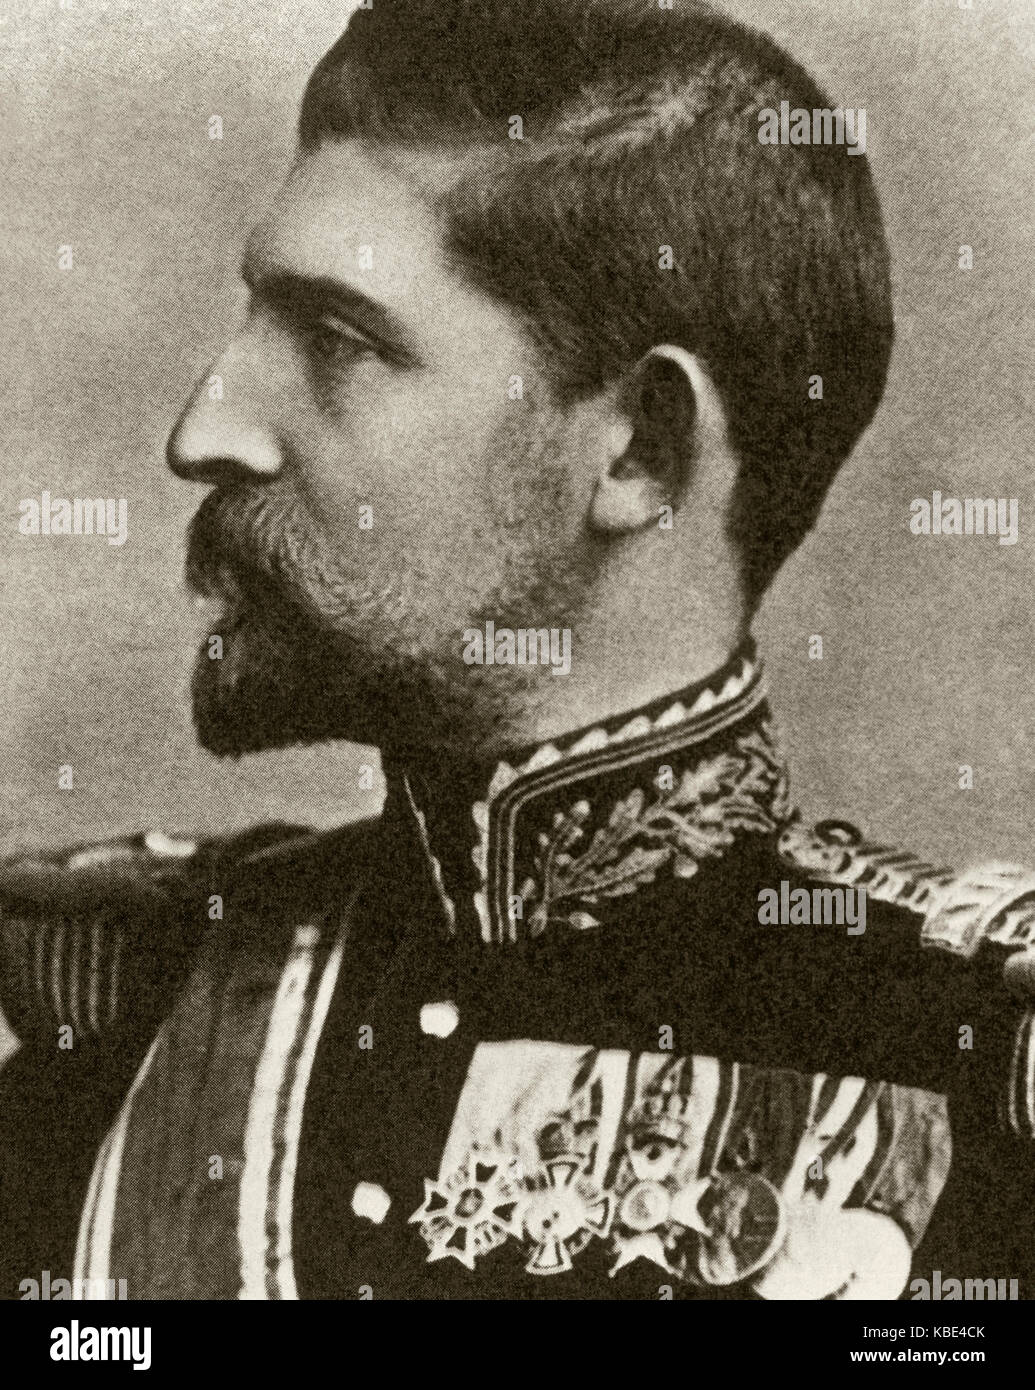 Ferdinand I (1865-1927), nicknamed 'the Unifier'. King of Romania from 1914-1927. Portrait. Photography. Stock Photo